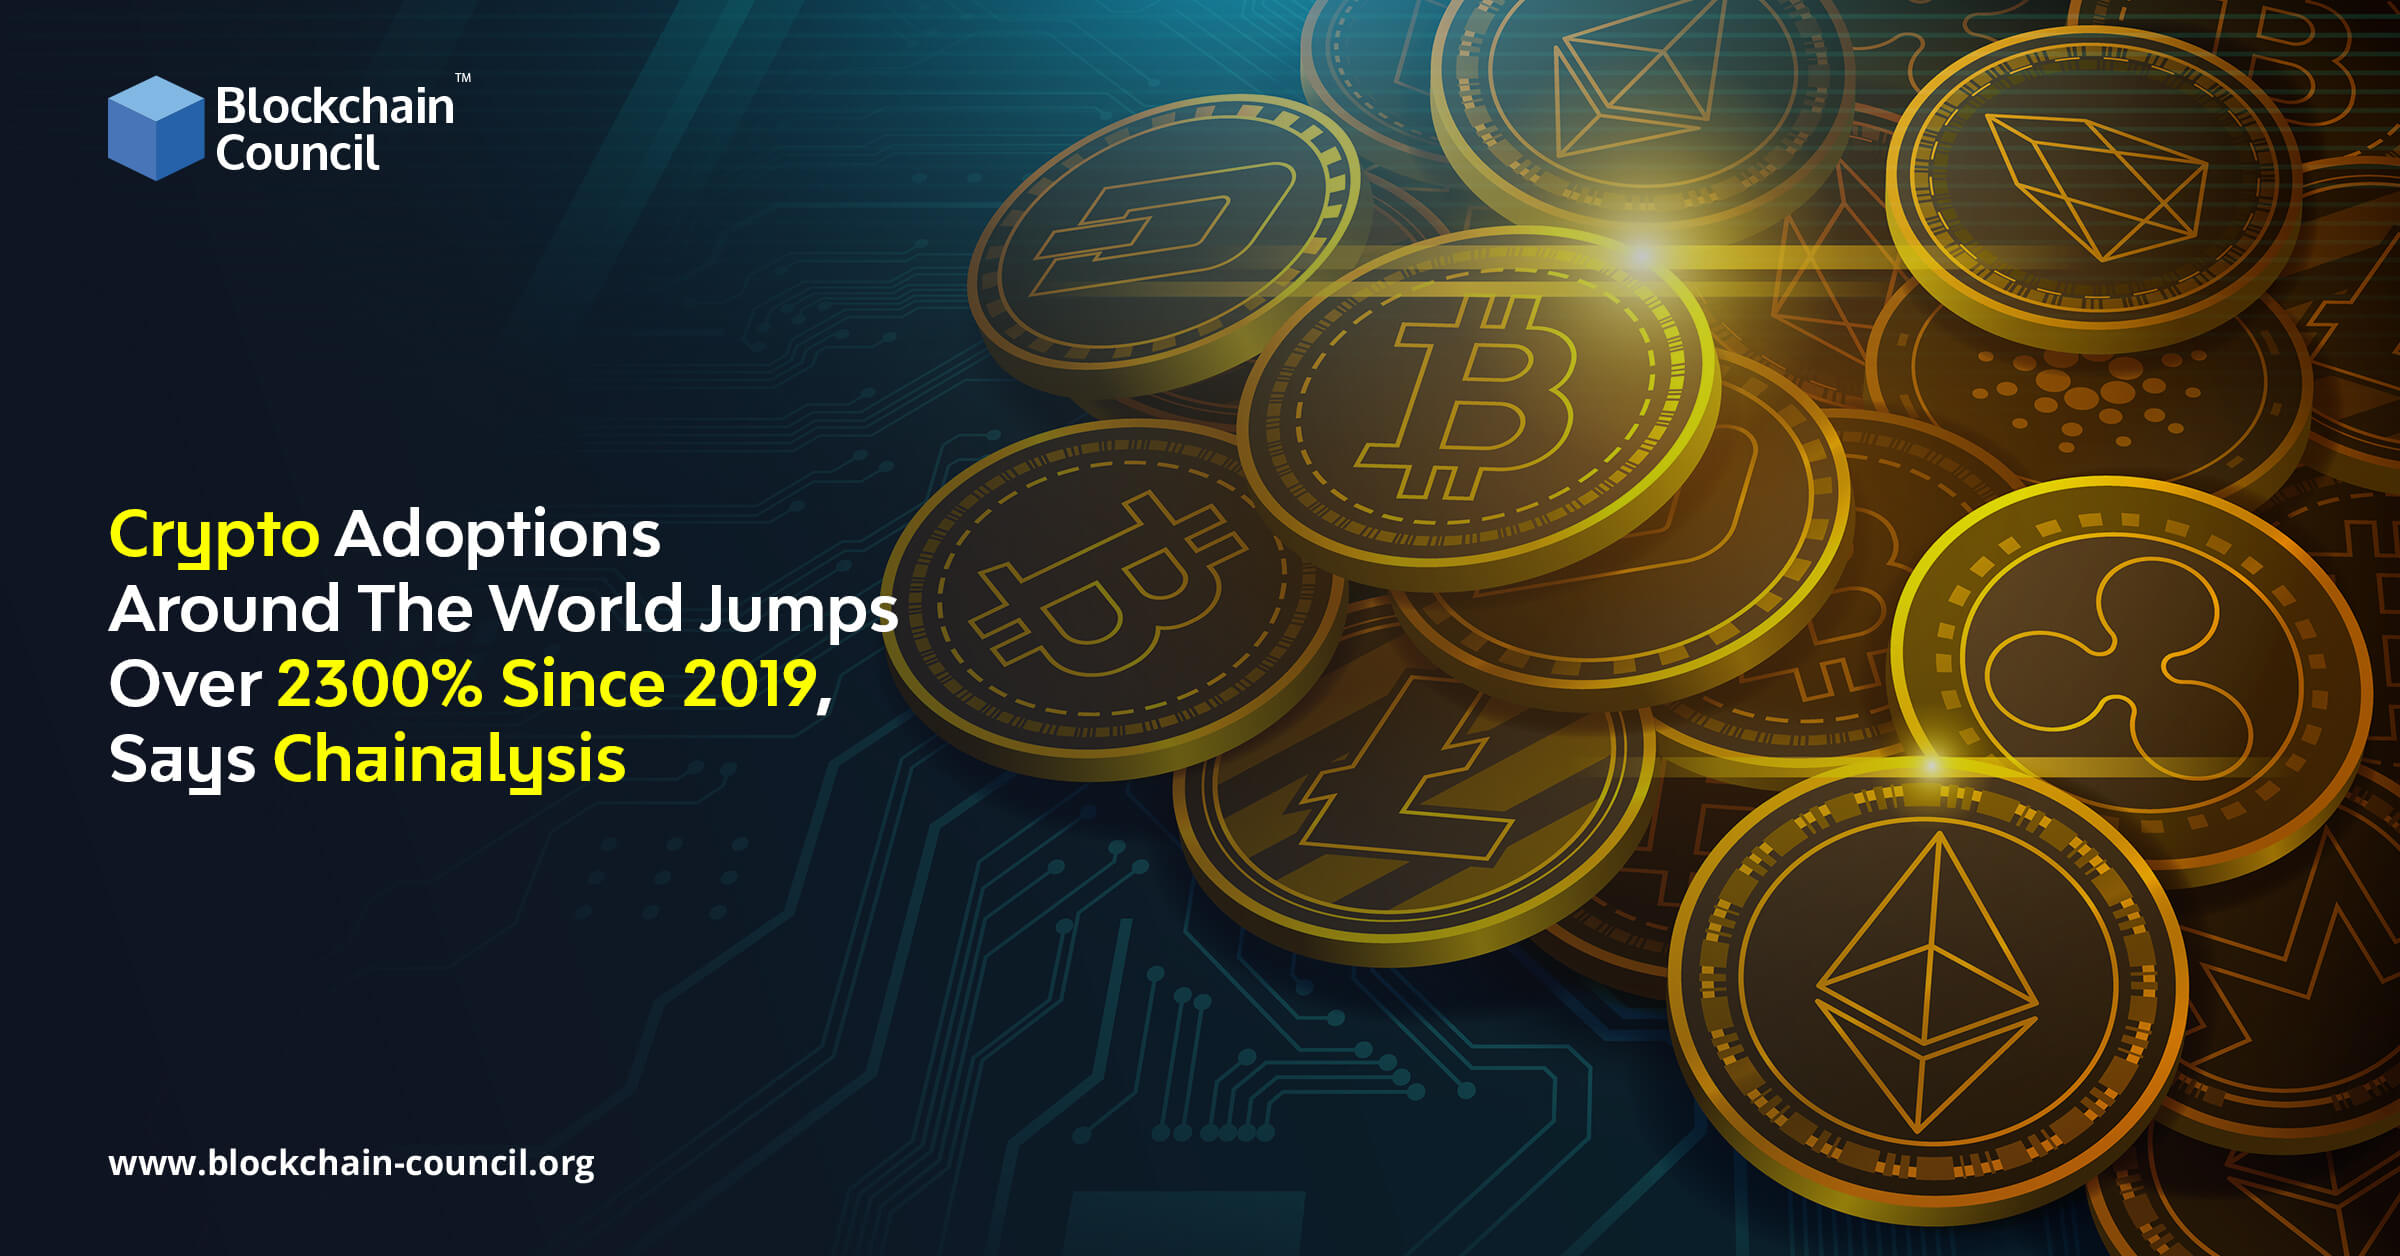 Crypto Adoptions Around The World Jumps Over 2300% Since 2019, Says Chainalysis